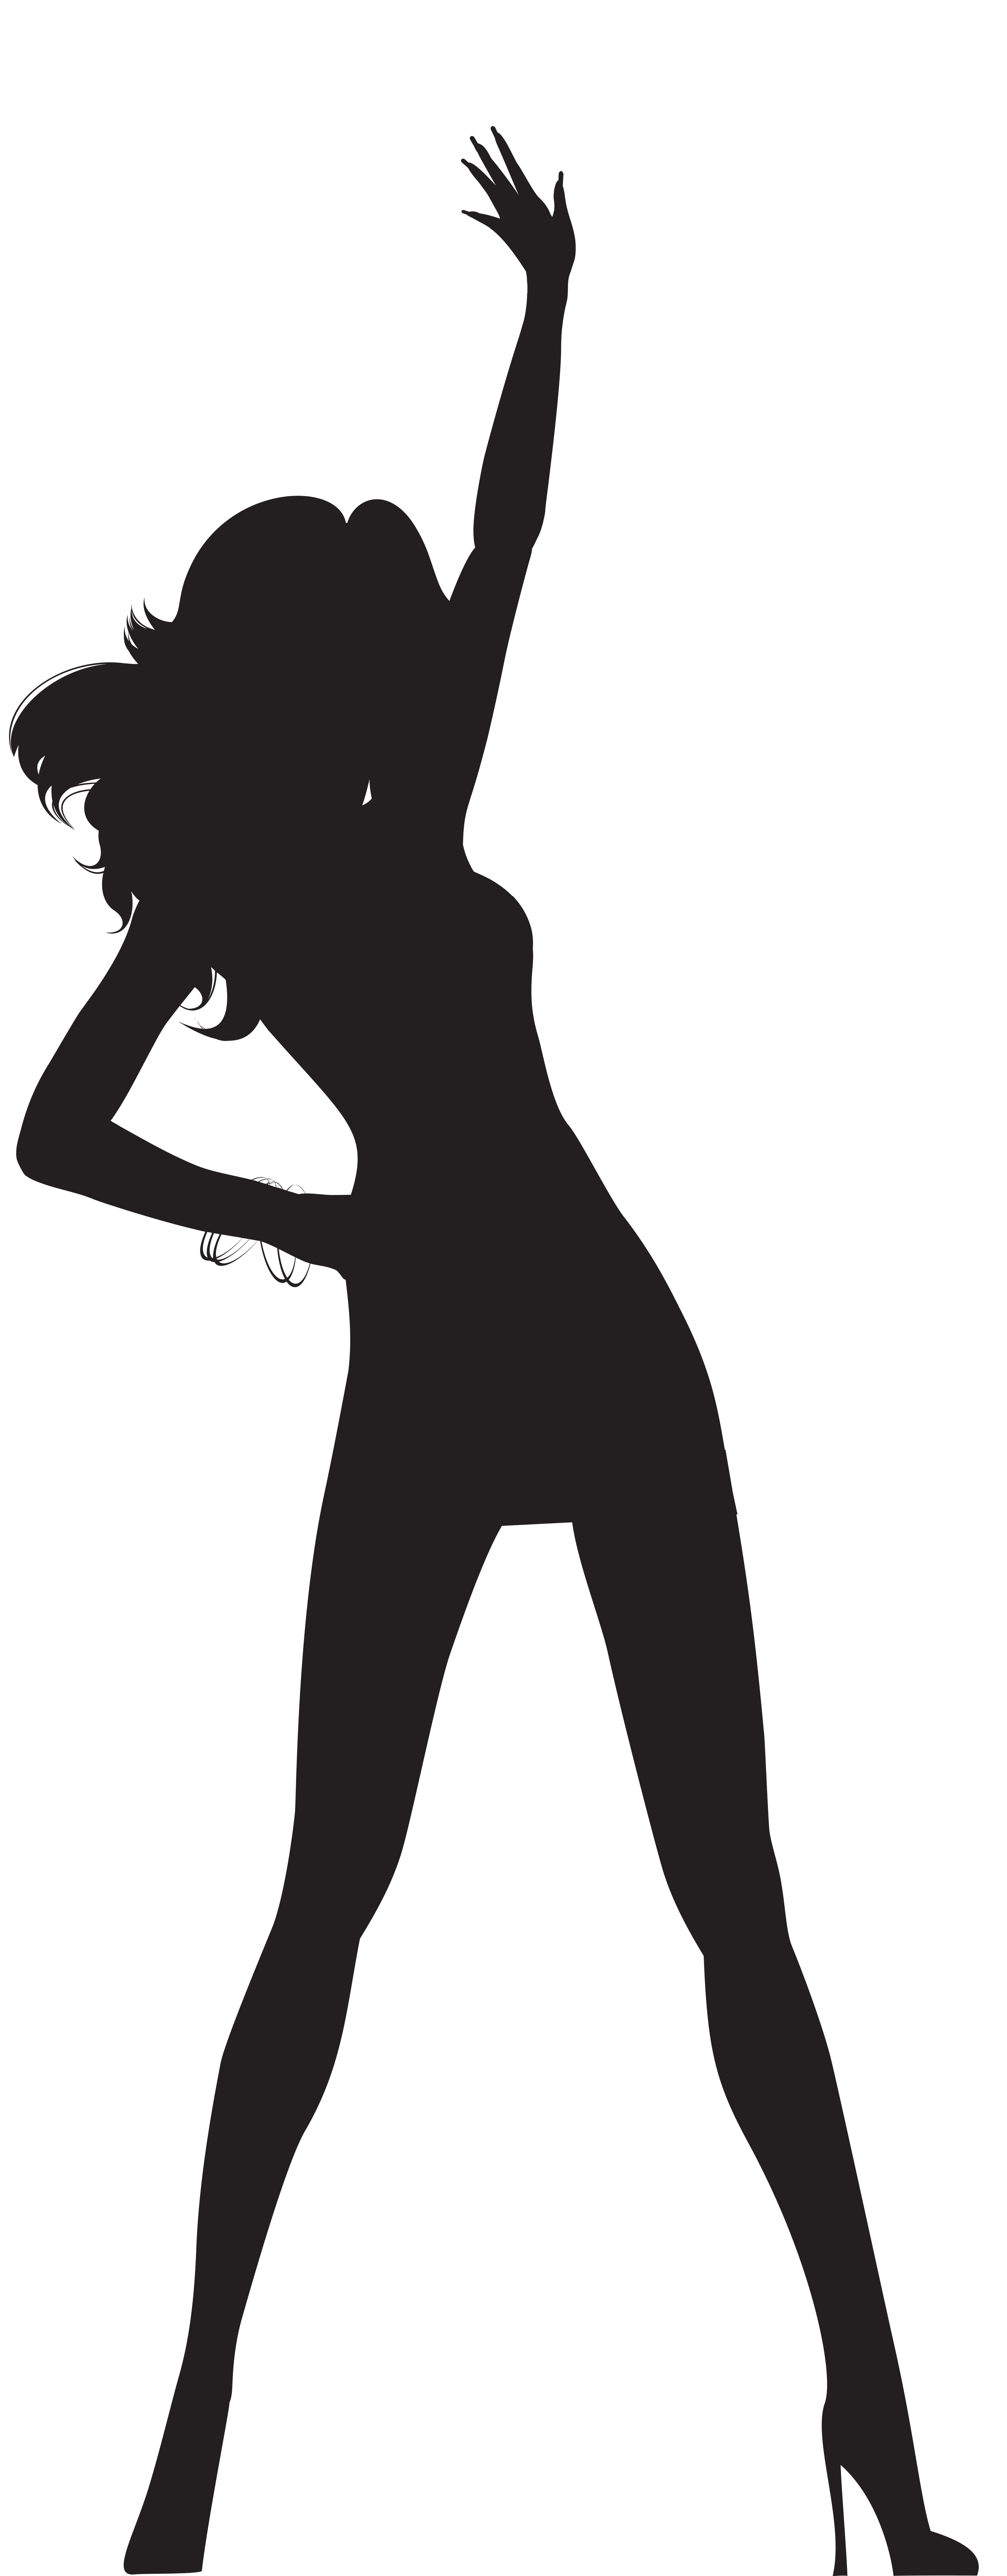 Ballerina Silhouette Png Clip Art Image Gallery Yopriceville High My Xxx Hot Girl 4746